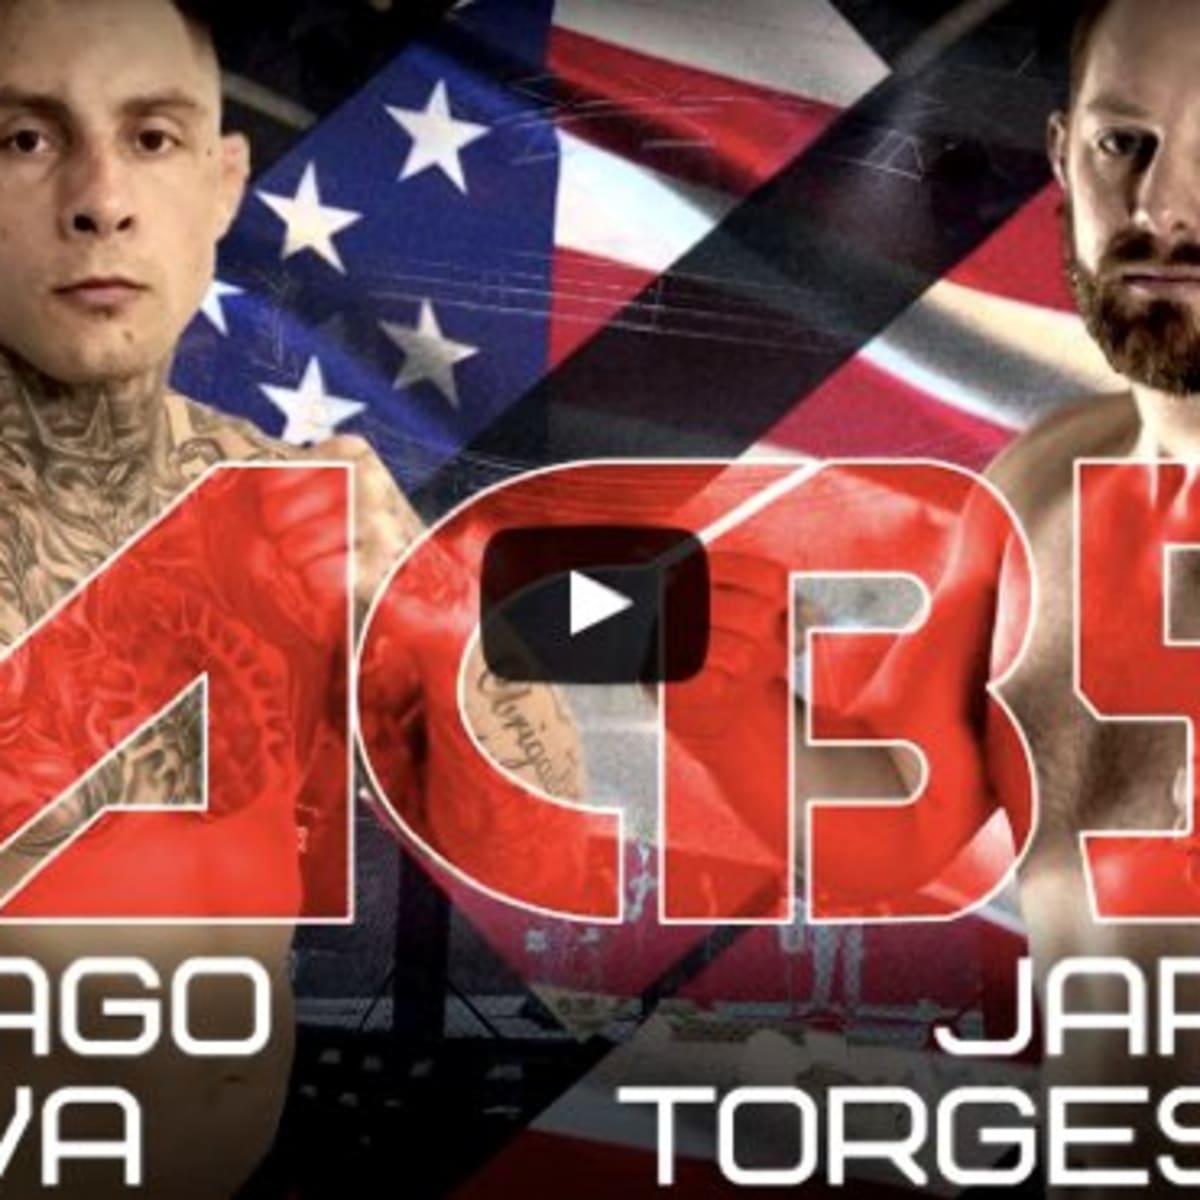 ACB 51 Streams Live and Free on MMAWeekly, Friday at 10pm ET